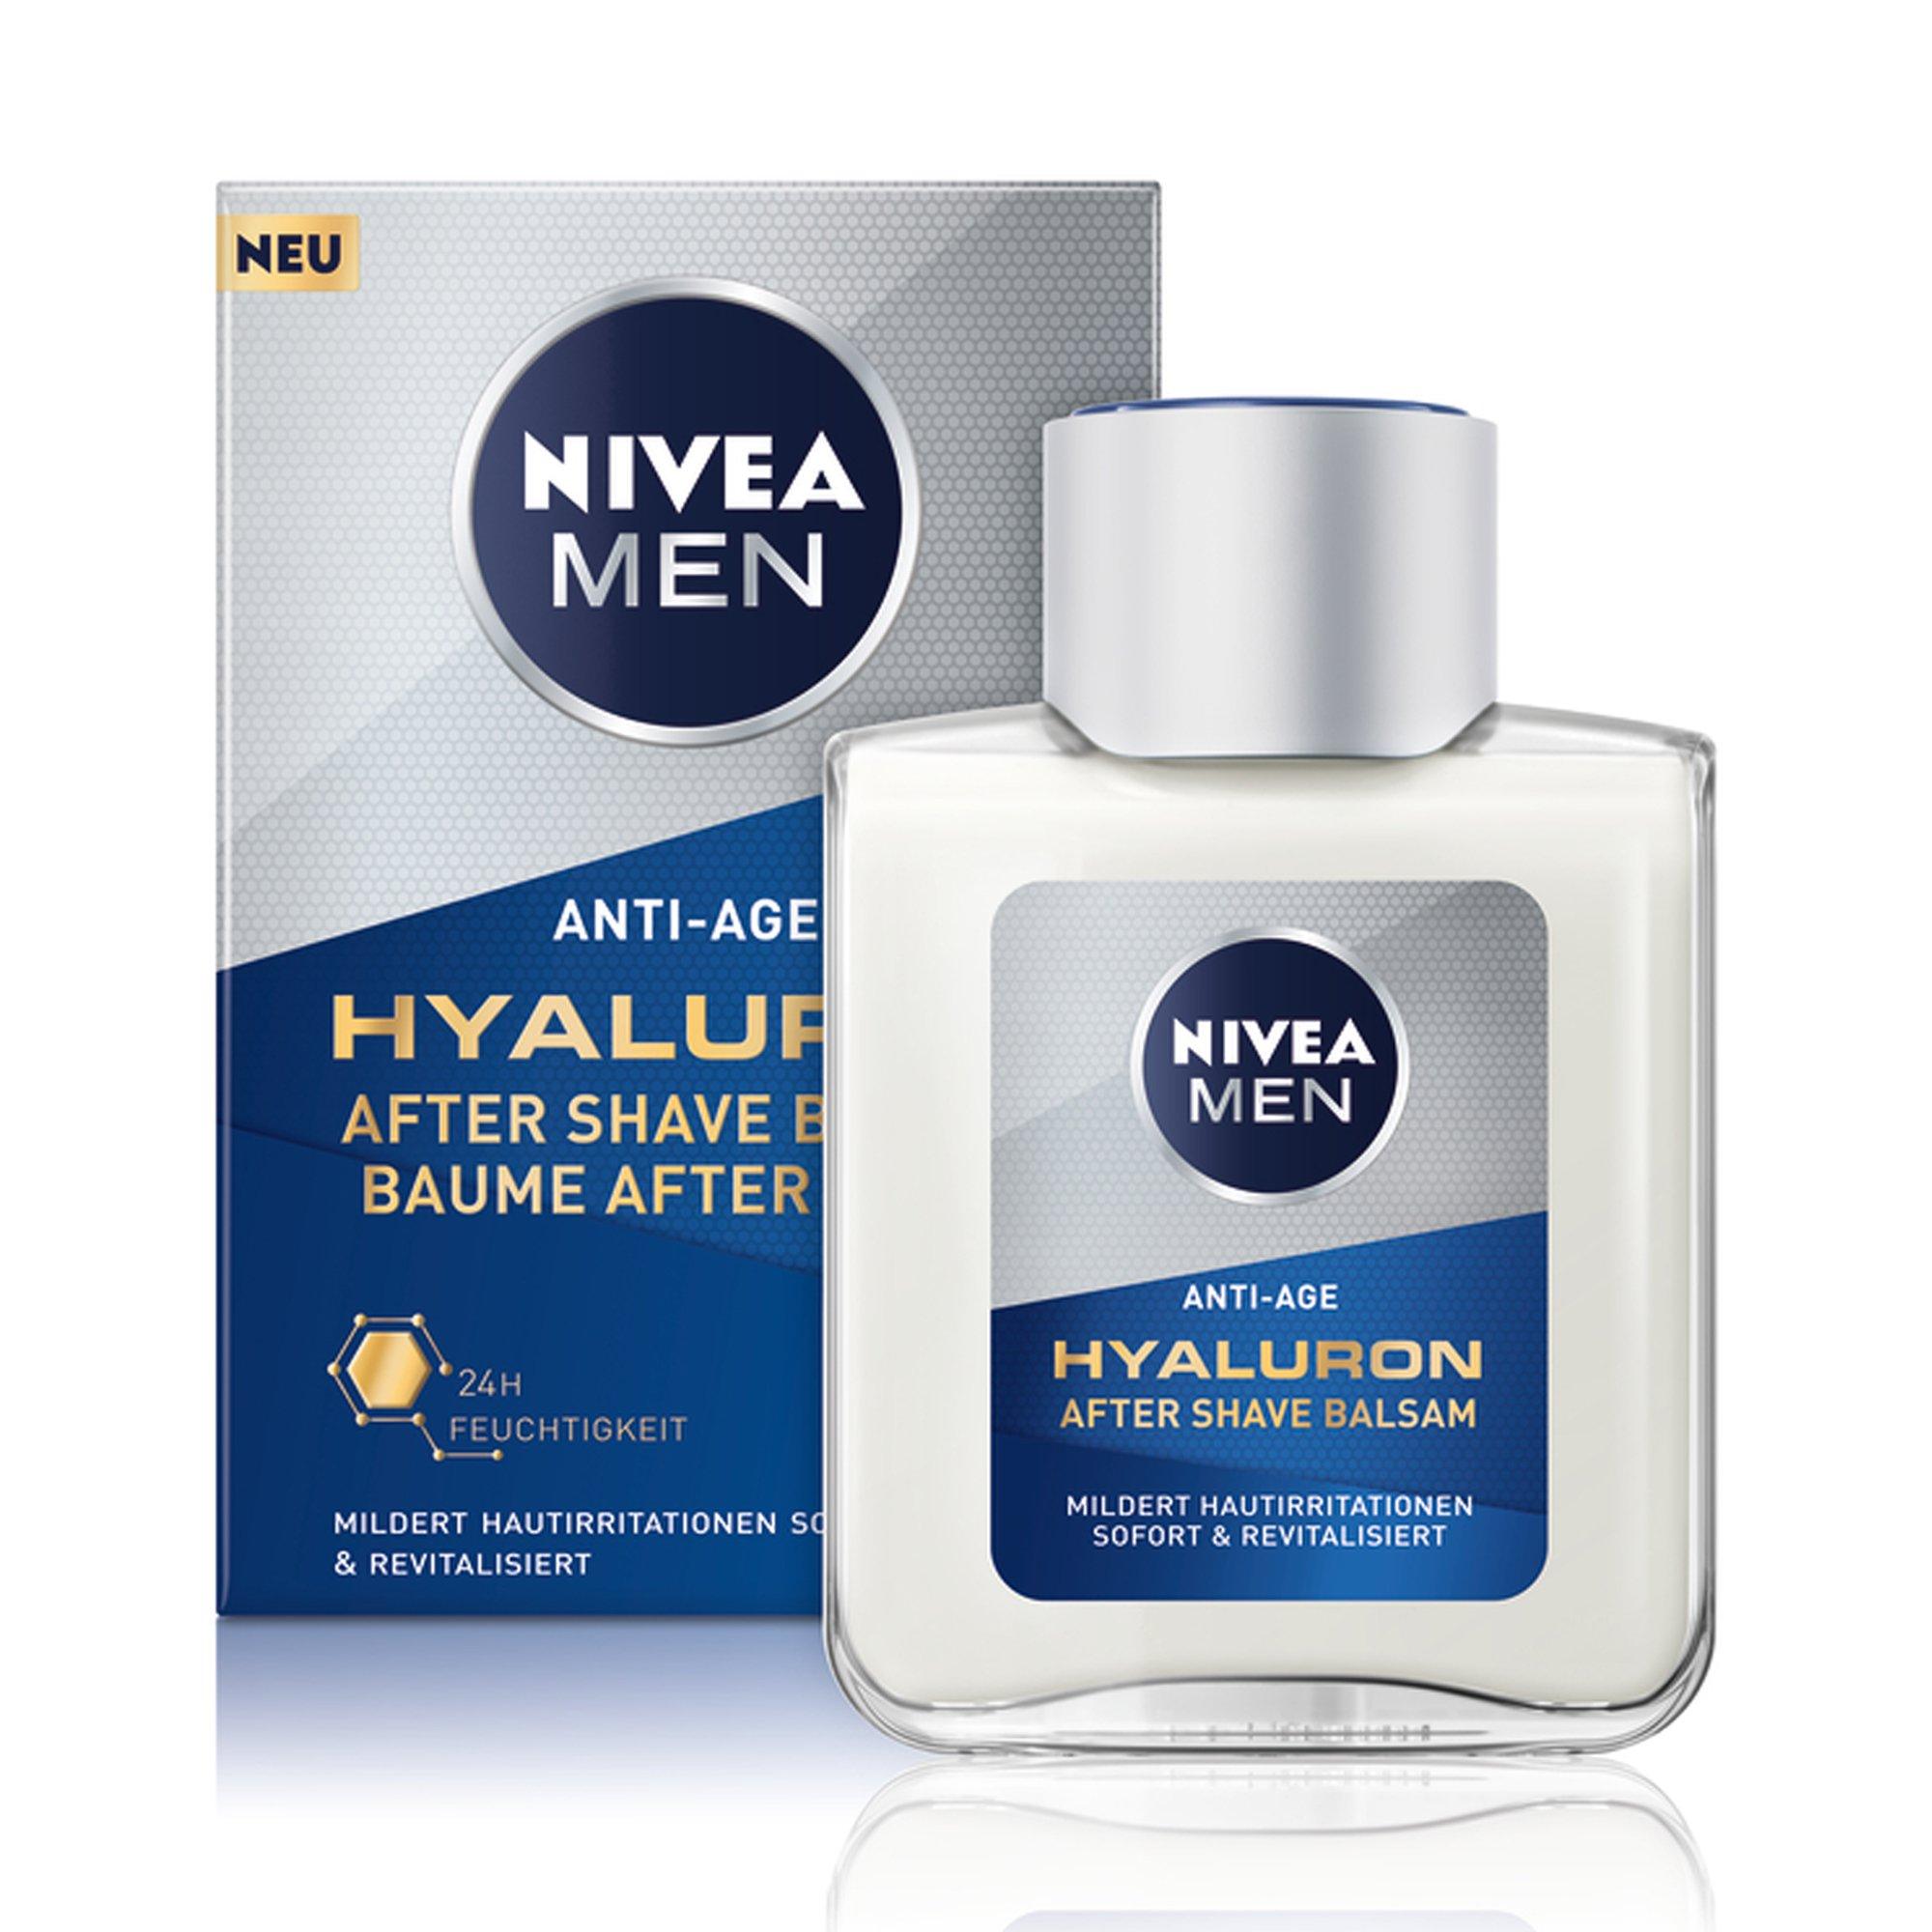 Image of NIVEA Anti-Age Hyaluron Anti-Age Hyaluron After Shave Balsam - 100 ml